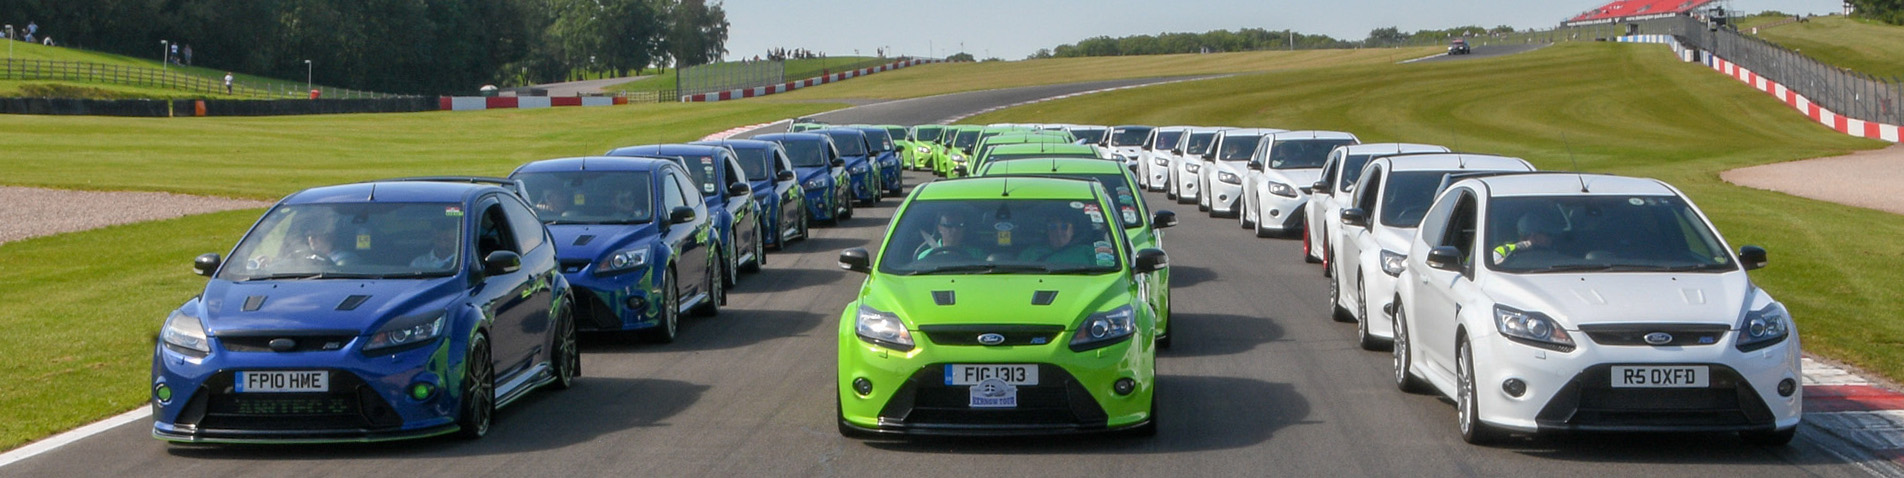 The Ford RS Owners Club